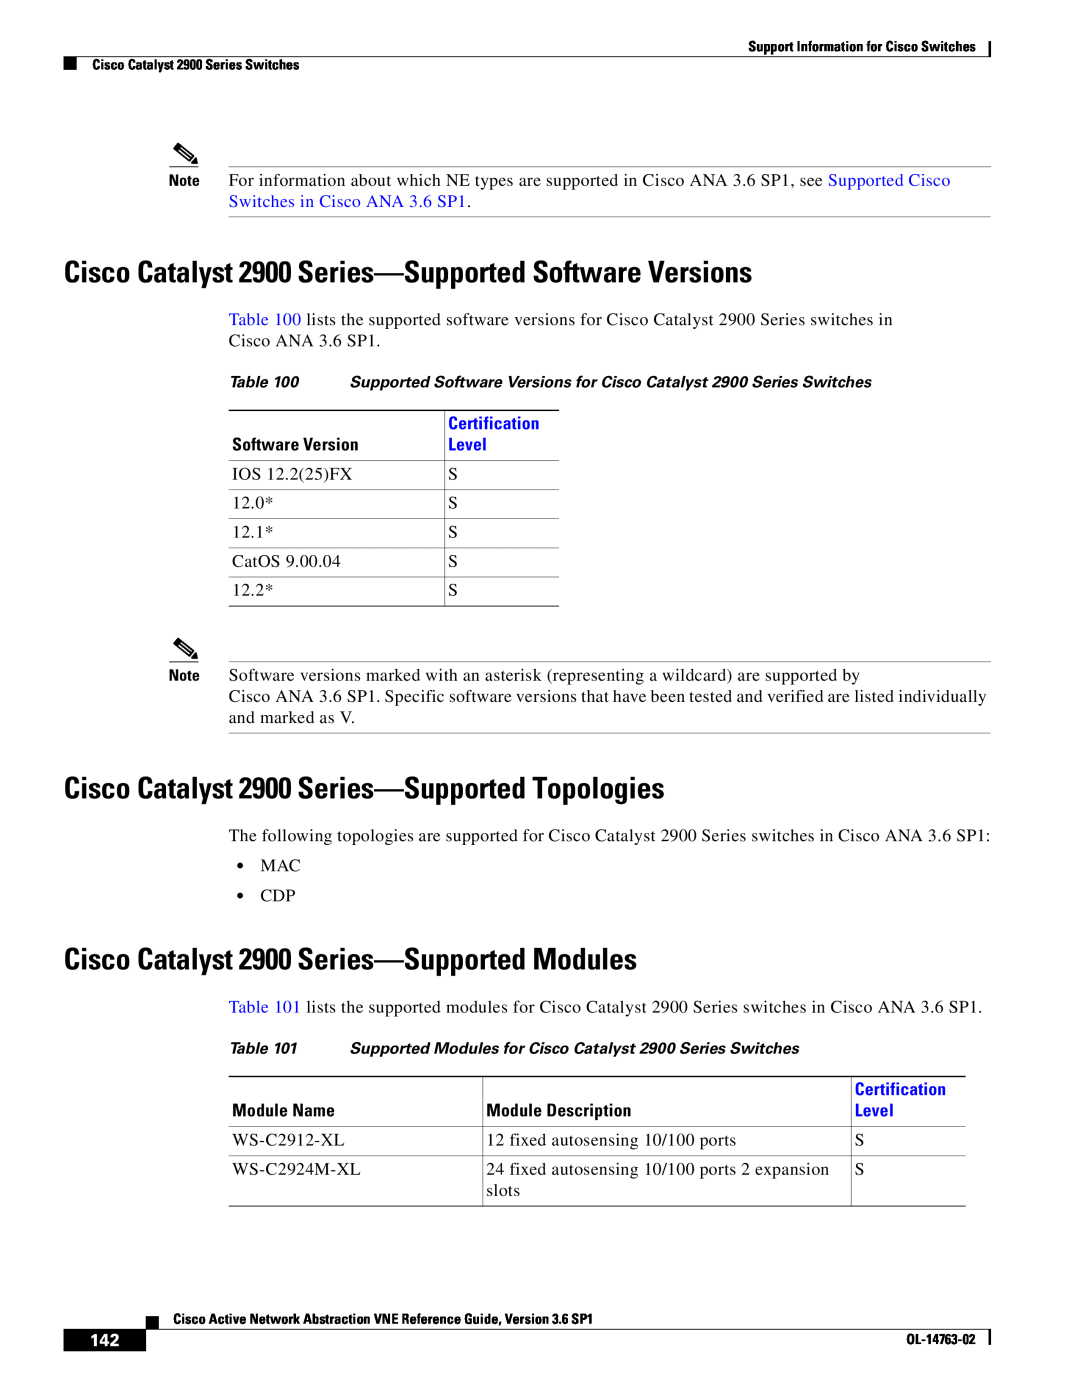 Cisco Systems OL-14763-02 manual Cisco Catalyst 2900 Series-Supported Software Versions, Module Name, Module Description 